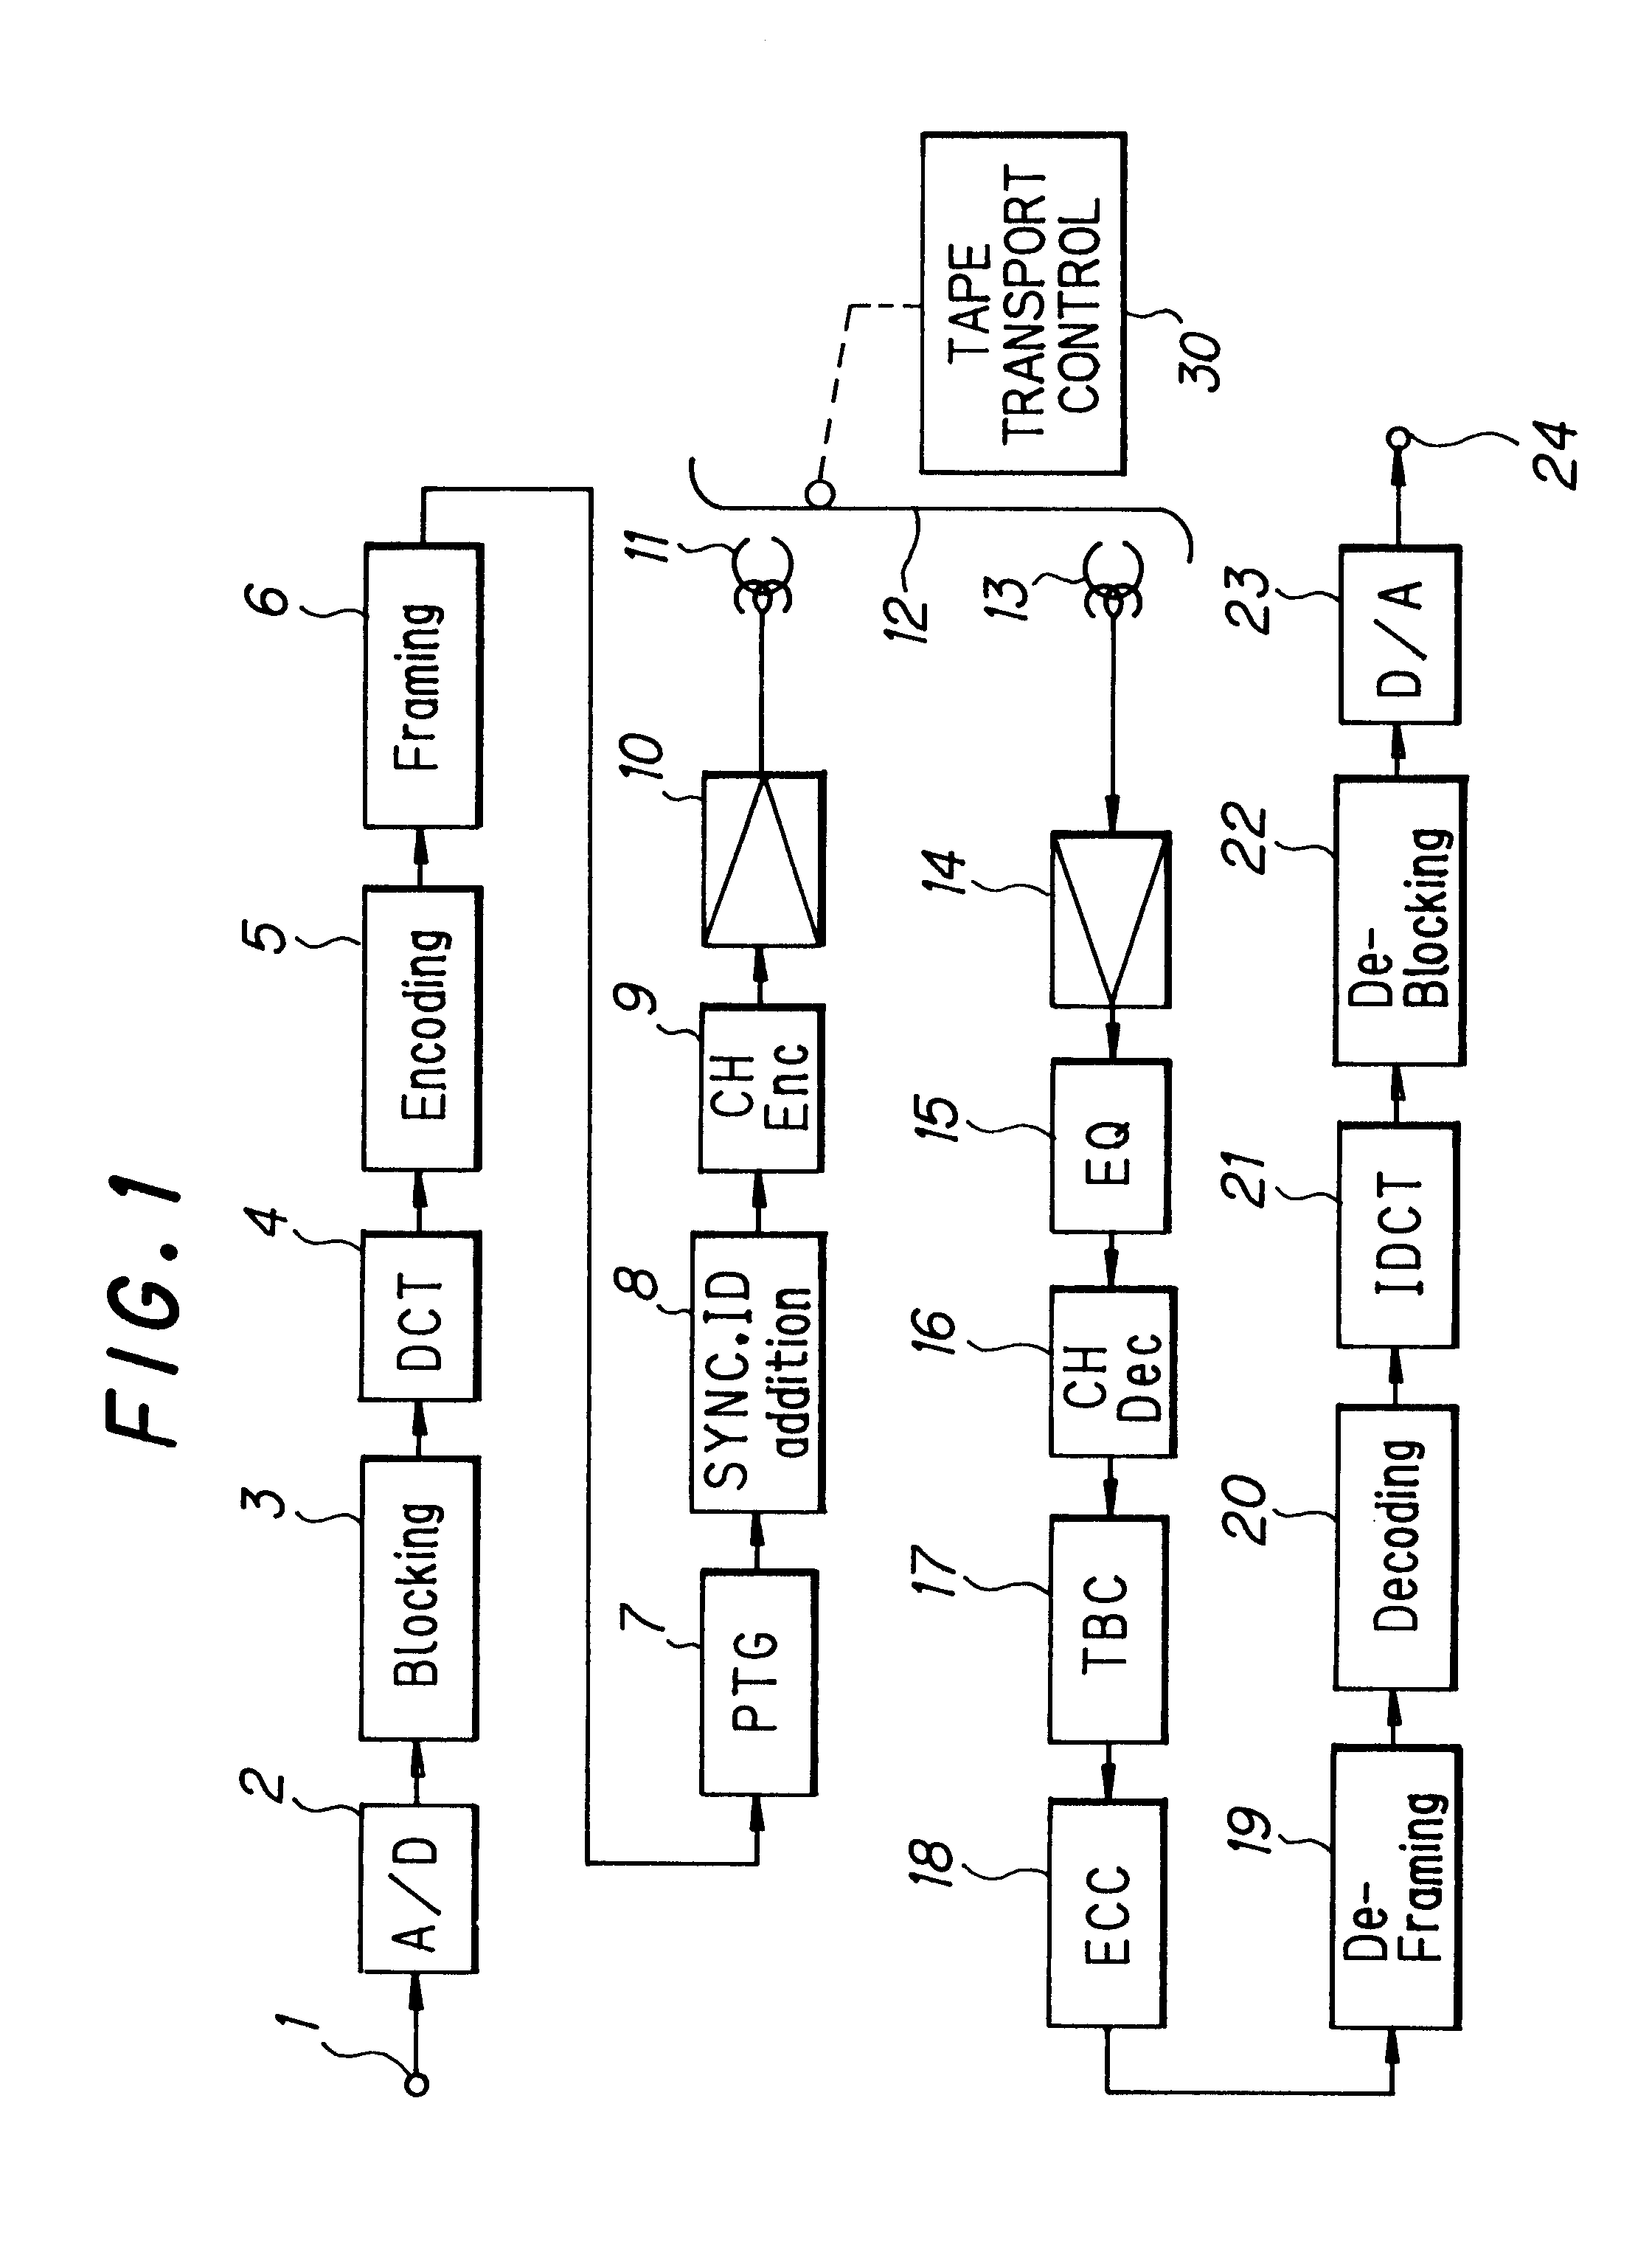 Digital video signal reproducing apparatus with high-speed play mode